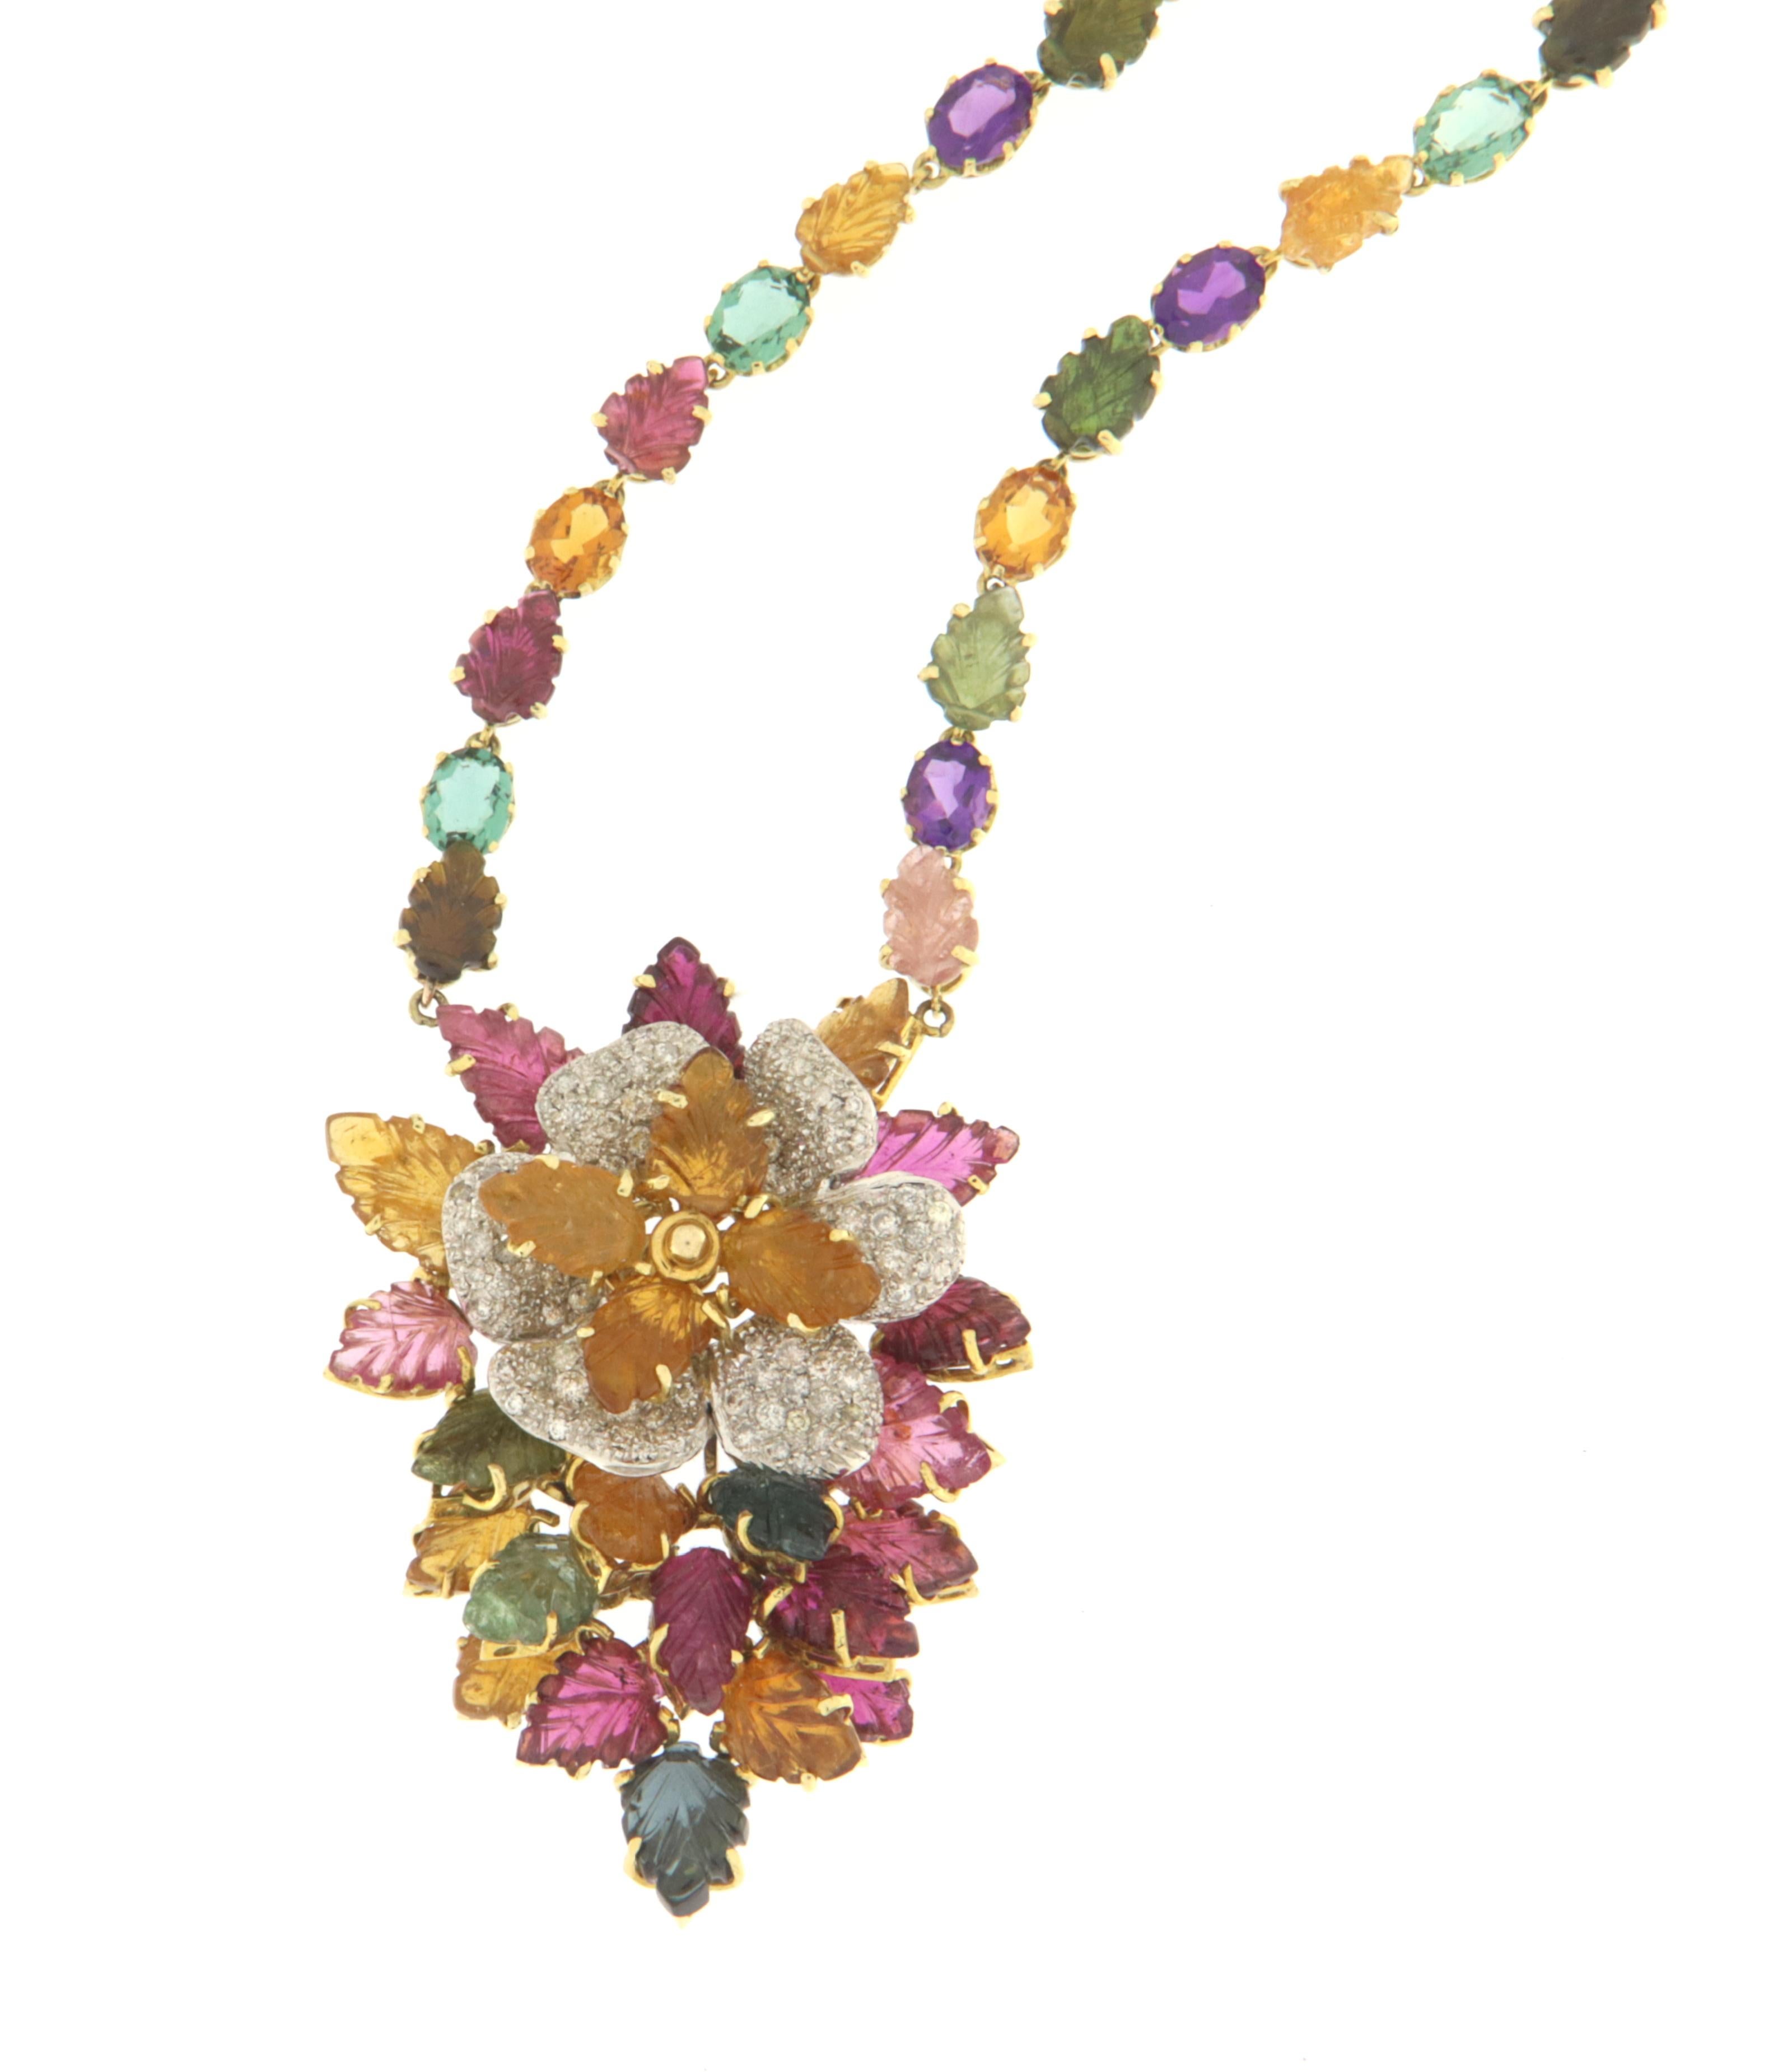 Necklace Explosion of color mounted in yellow and white gold 14 karat, diamonds and mix colour leaves tourmalines.
Necklace to wear also for important events

Tourmaline total weight 50.28 Karat
Diamonds weight 2.90 karat
Necklace total weight 55.40